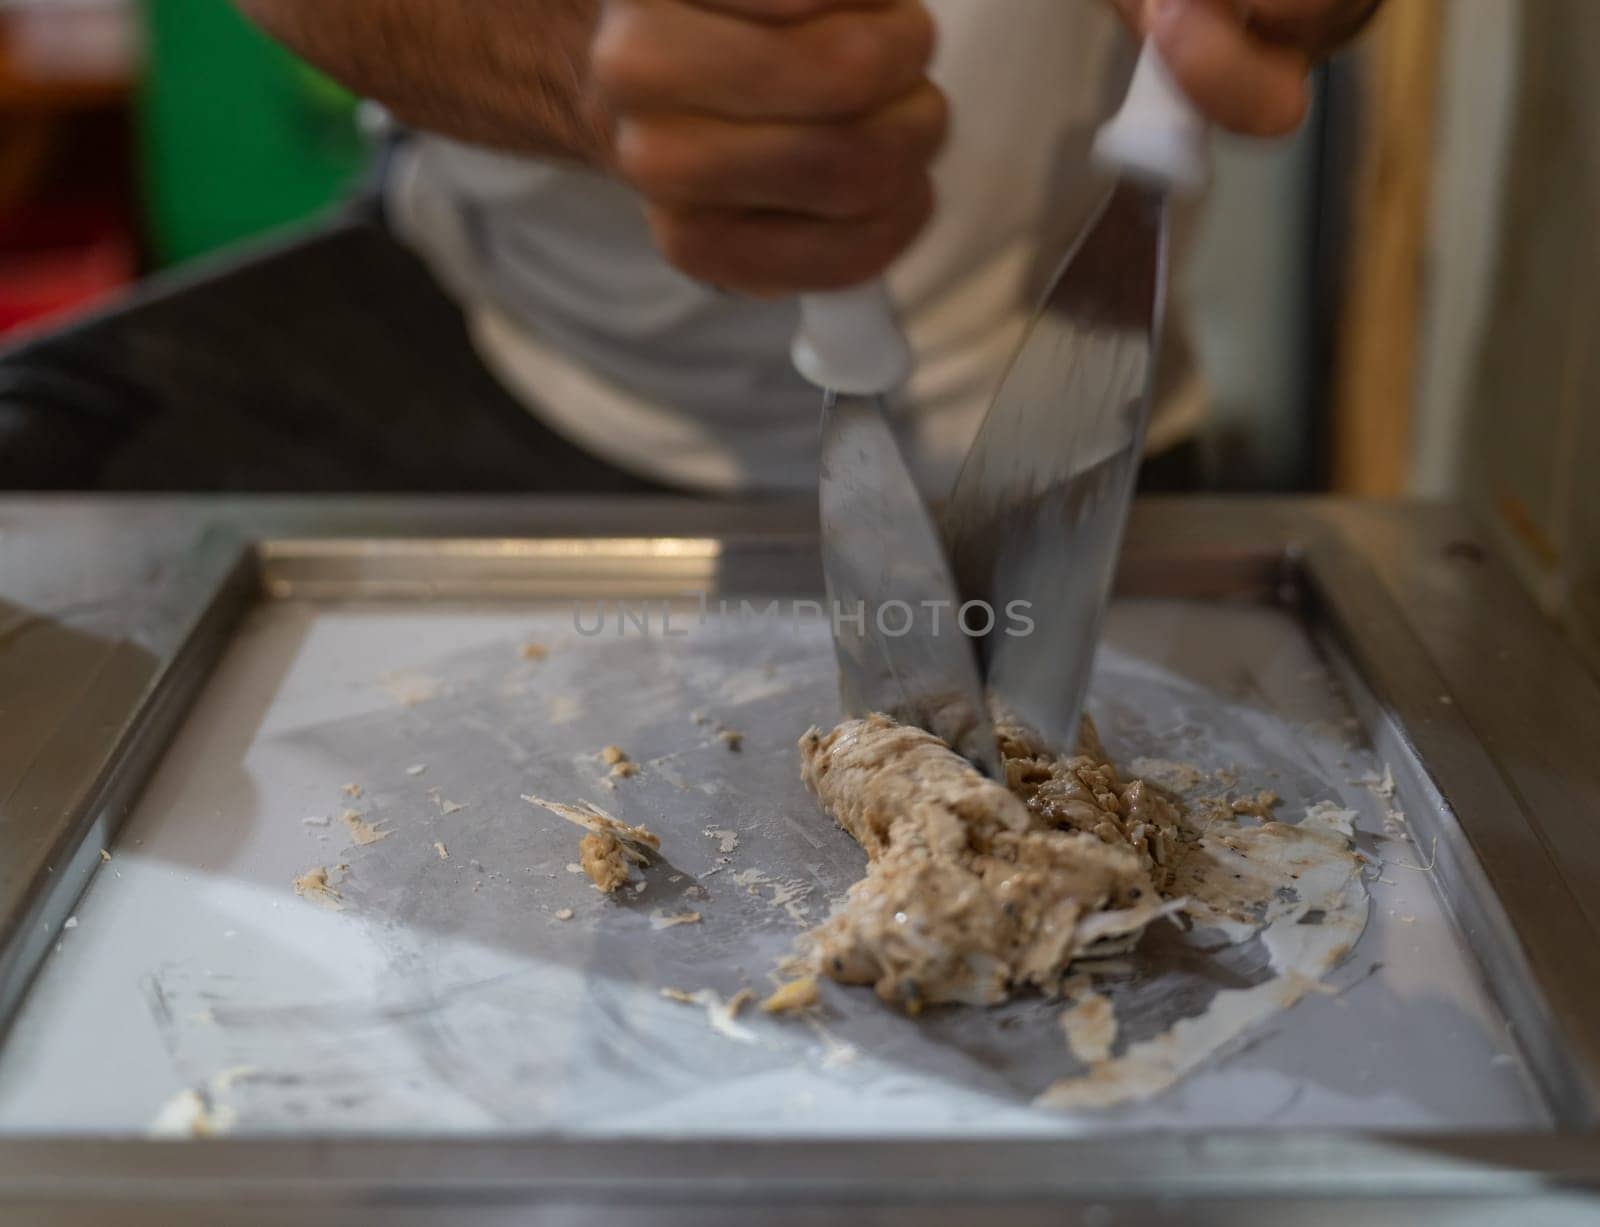 A craftsman makes rolled ice cream on a cold plate with skill.